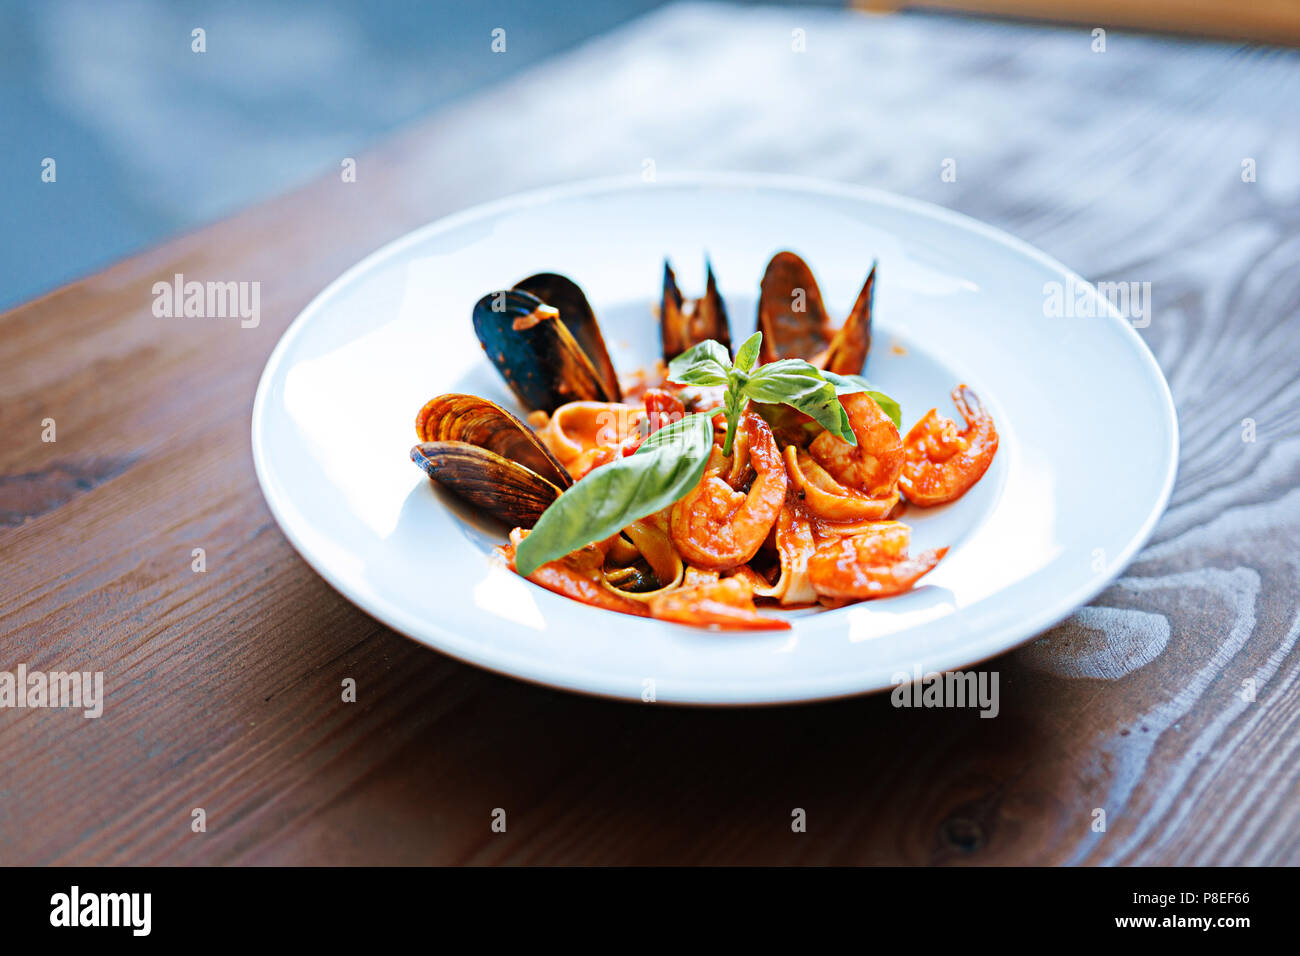 Close up of delicious pasta with some seafood in tomato sauce Stock Photo